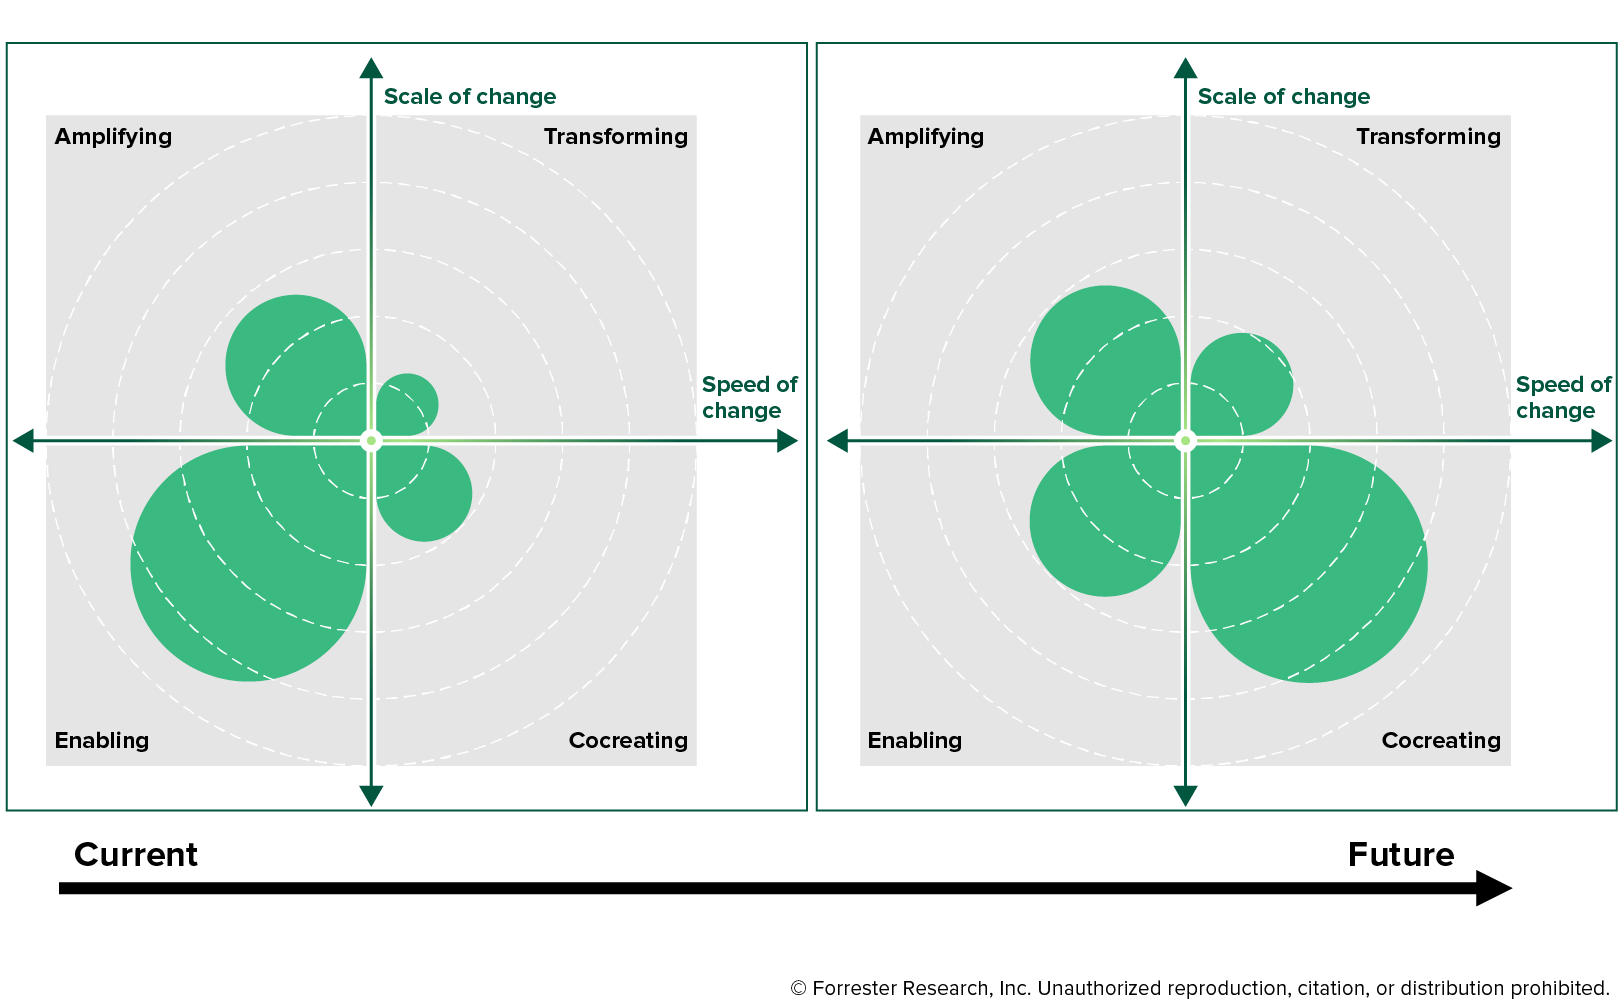 Two quadrants showing the four high-performance IT styles: enabling bottom left, cocreating bottom right, amplifying in the top left, and transforming in the top right. Going upwards is more scale of change. Going rightward is greater speed of change. The first quadrant is current state with an emphasis on enabling. The second quadrant is future state with an emphasis on cocreating.